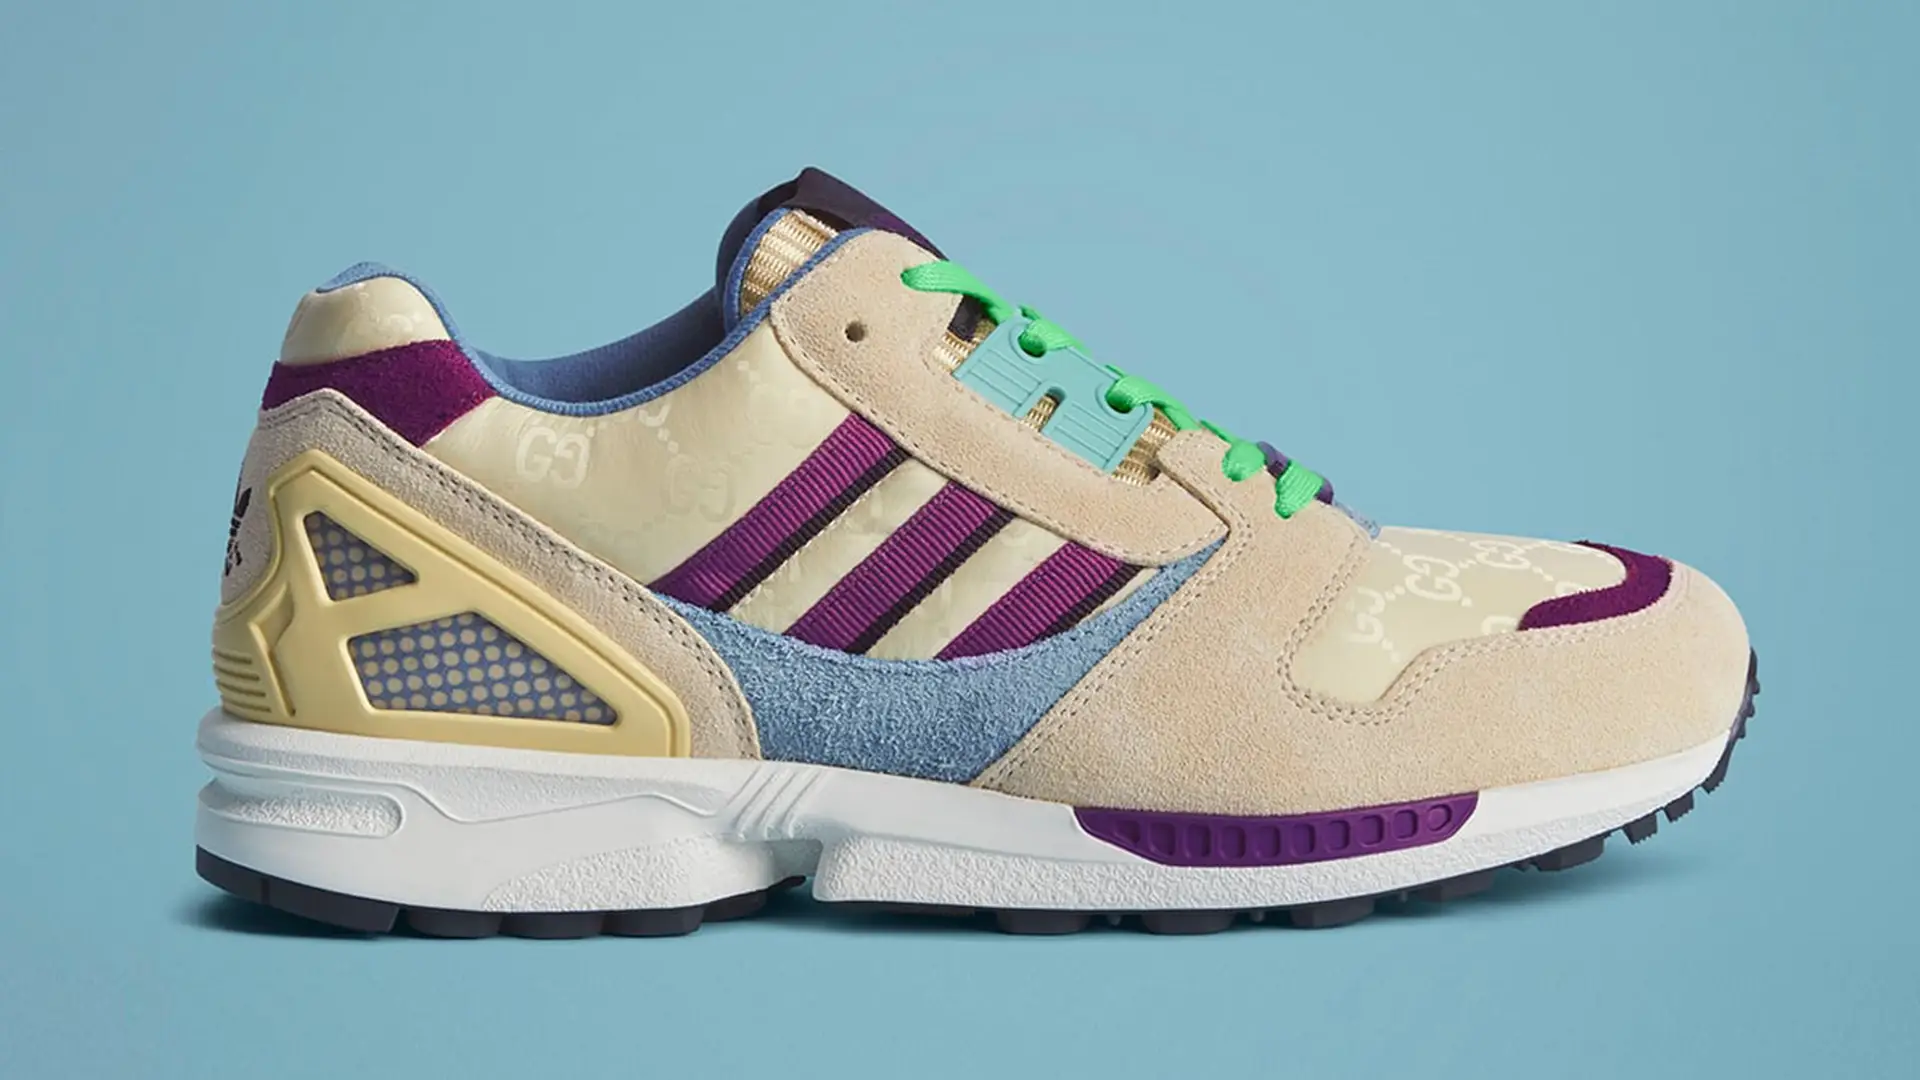 Why the Gucci x Adidas Collaboration Was Meant To Be - 12